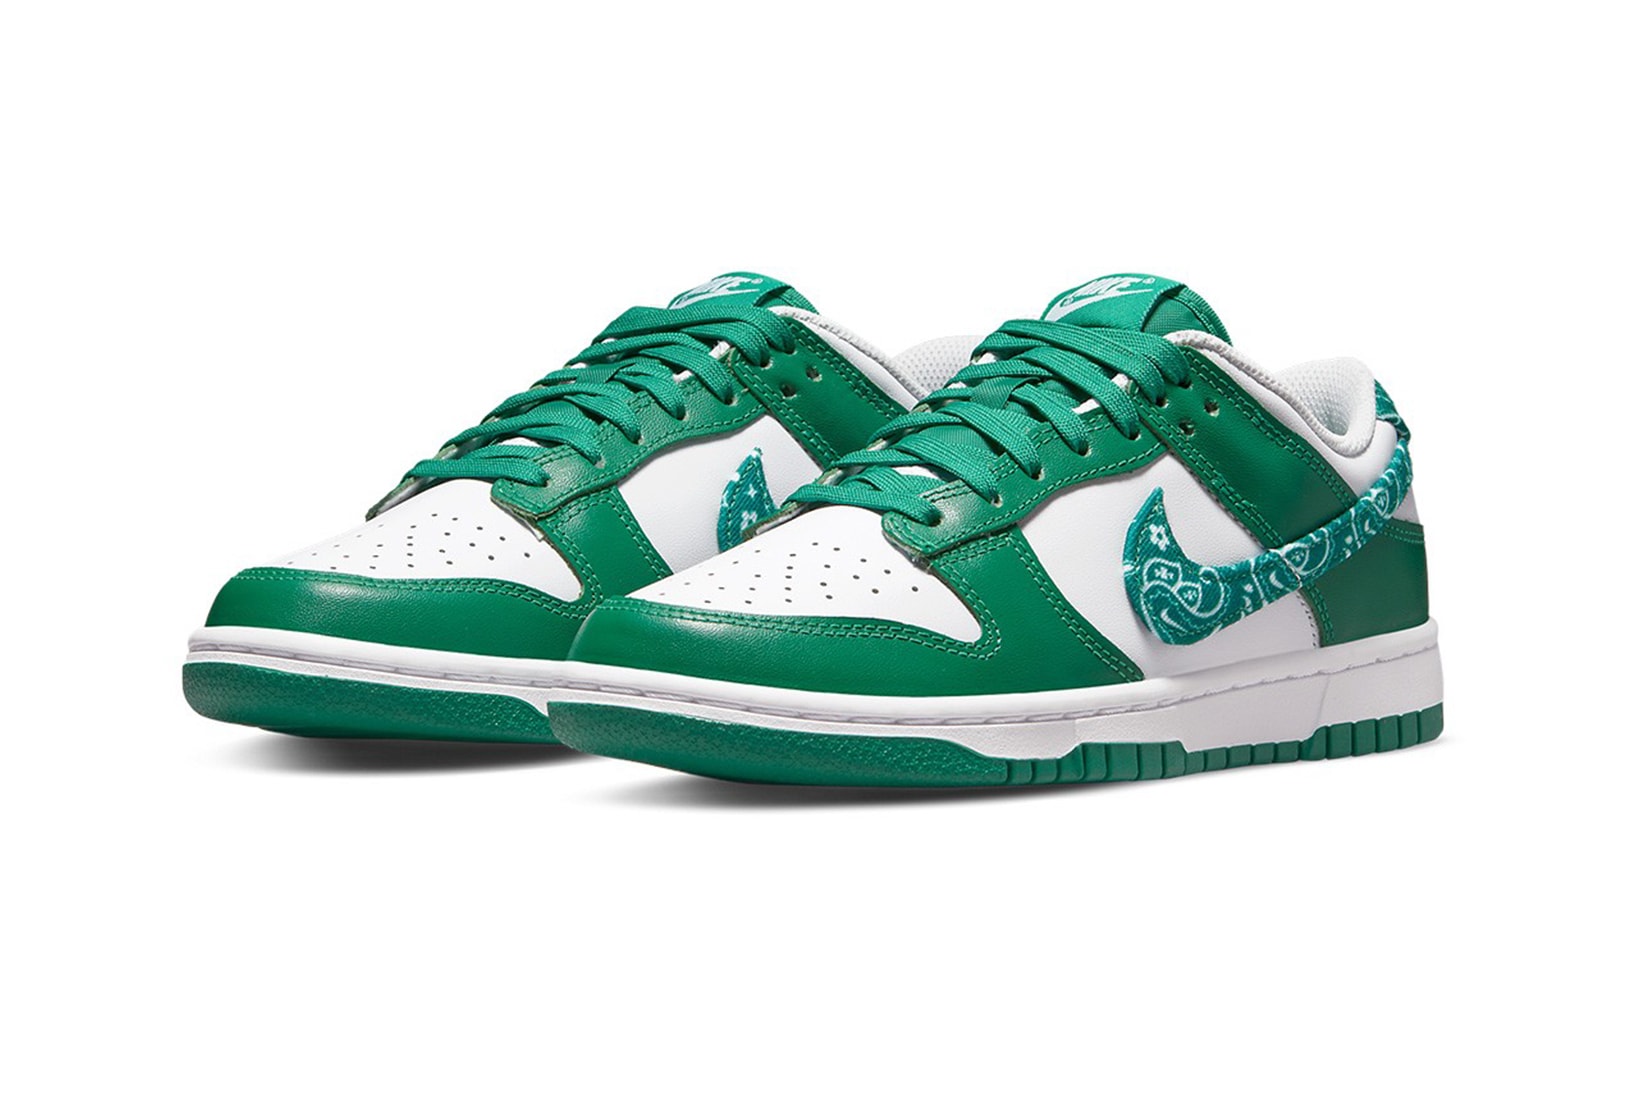 Nike Dunk Low Green Paisley Sneakers Product Shot